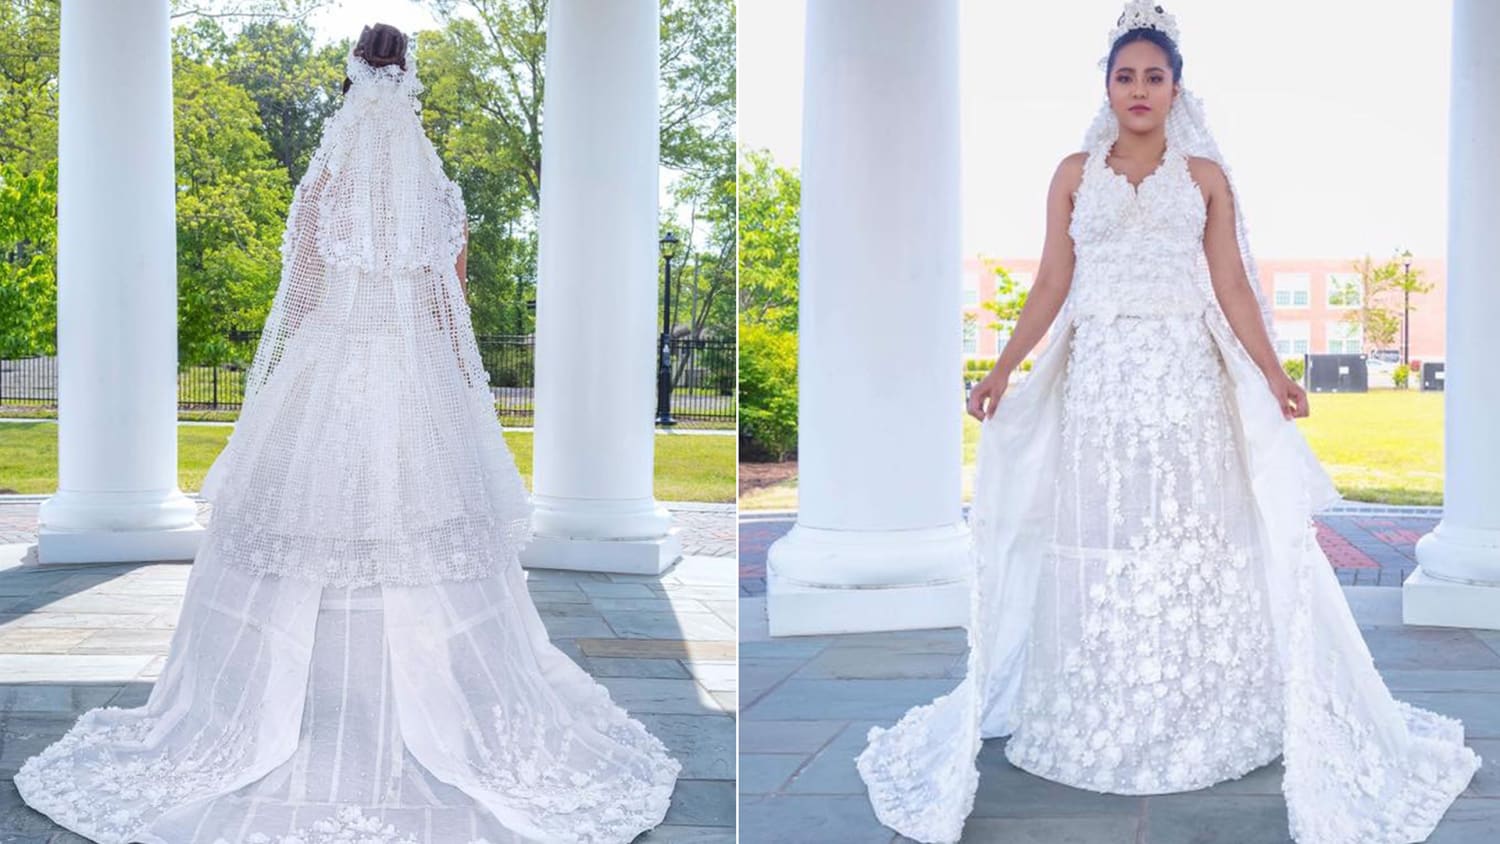 Wedding Dresses Out Of Toilet Paper